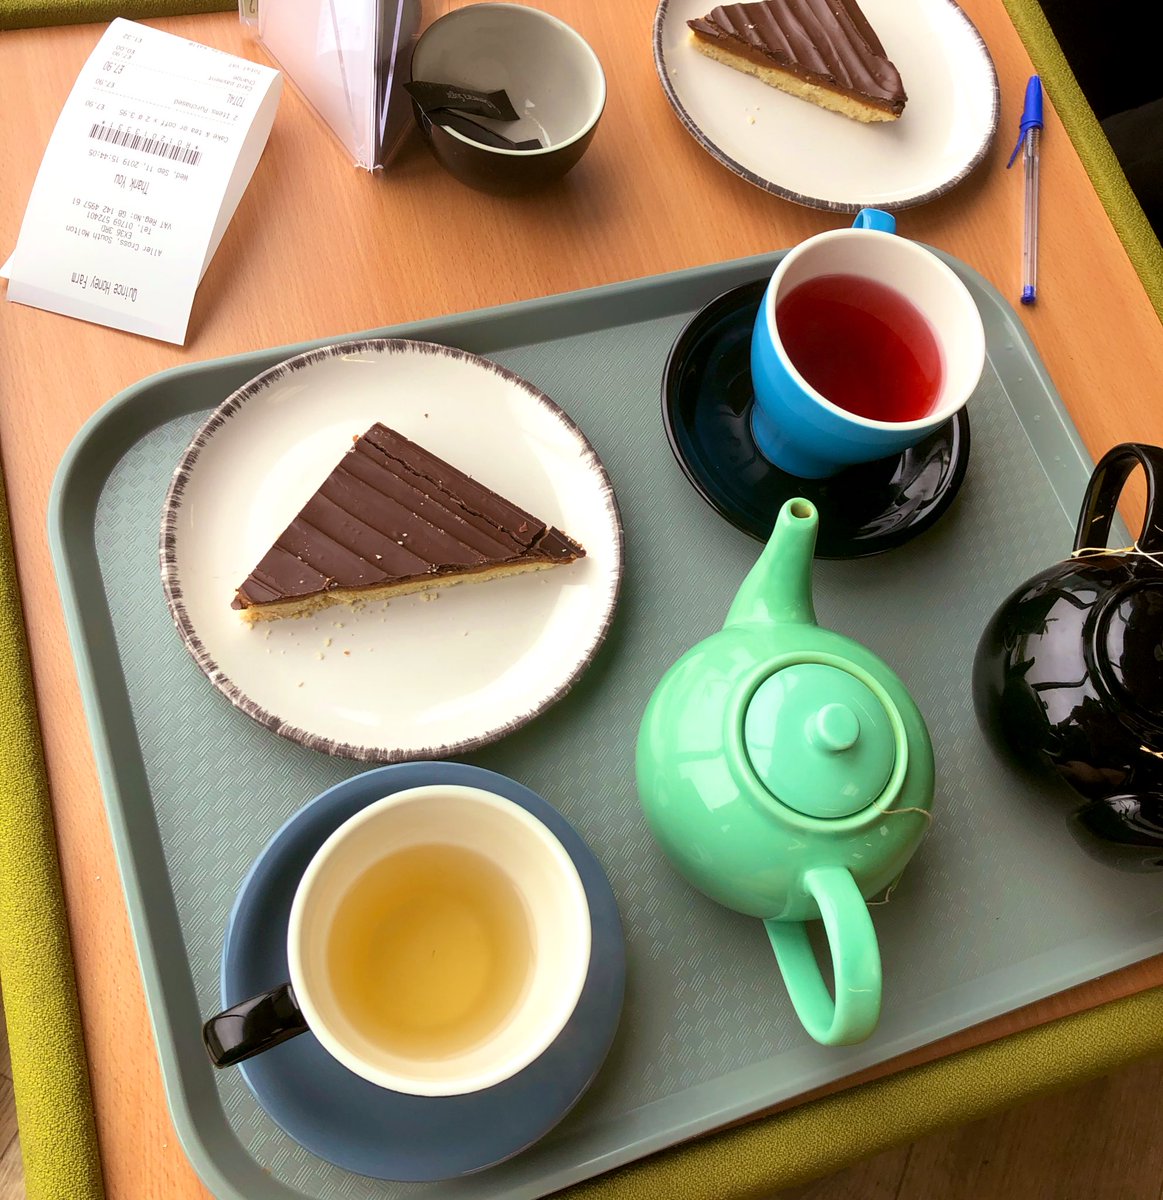 After two failed attempts at coffee stops in Devon (because they were closed 🤷‍♀️), ended up finding this little gem @quincehoneyfarm. Tea & cake and lots of chat @Dribuildgroup #Opportunities #BusinessDevelopment #Marketing